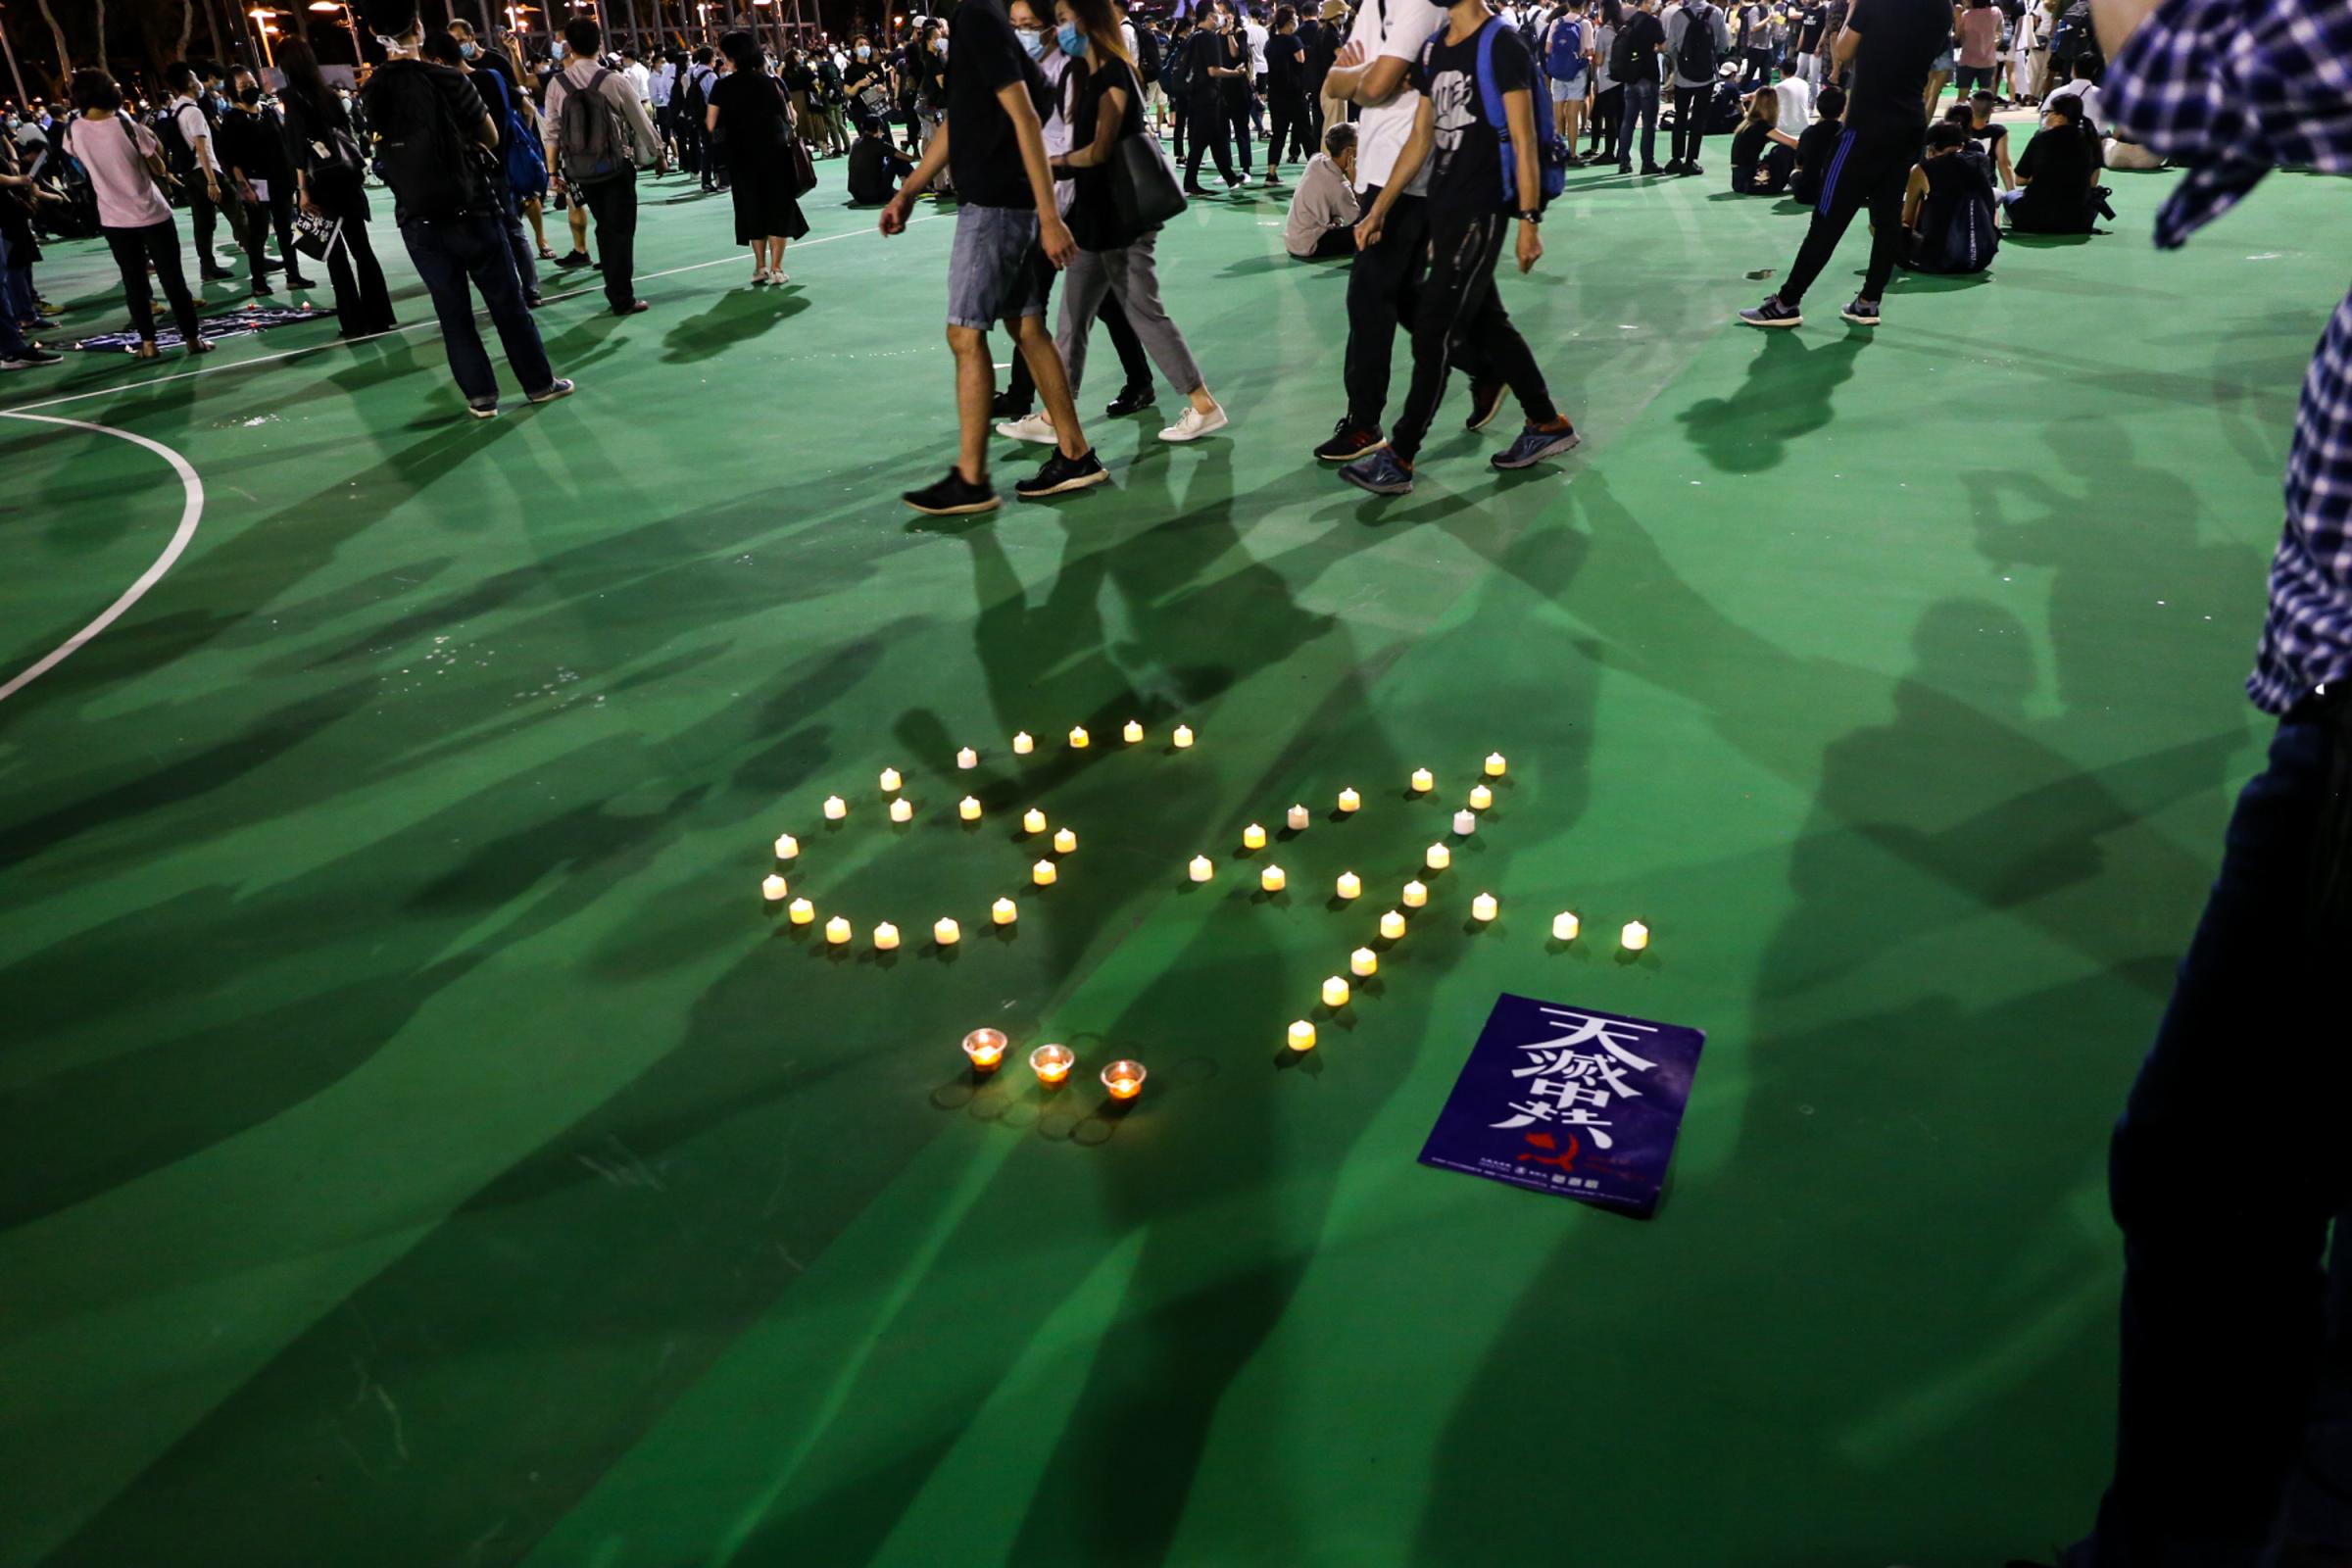 [2019-2021] Hong Kong Protests: Behind the Front Lines - Candles arranged in the number of "6" and...